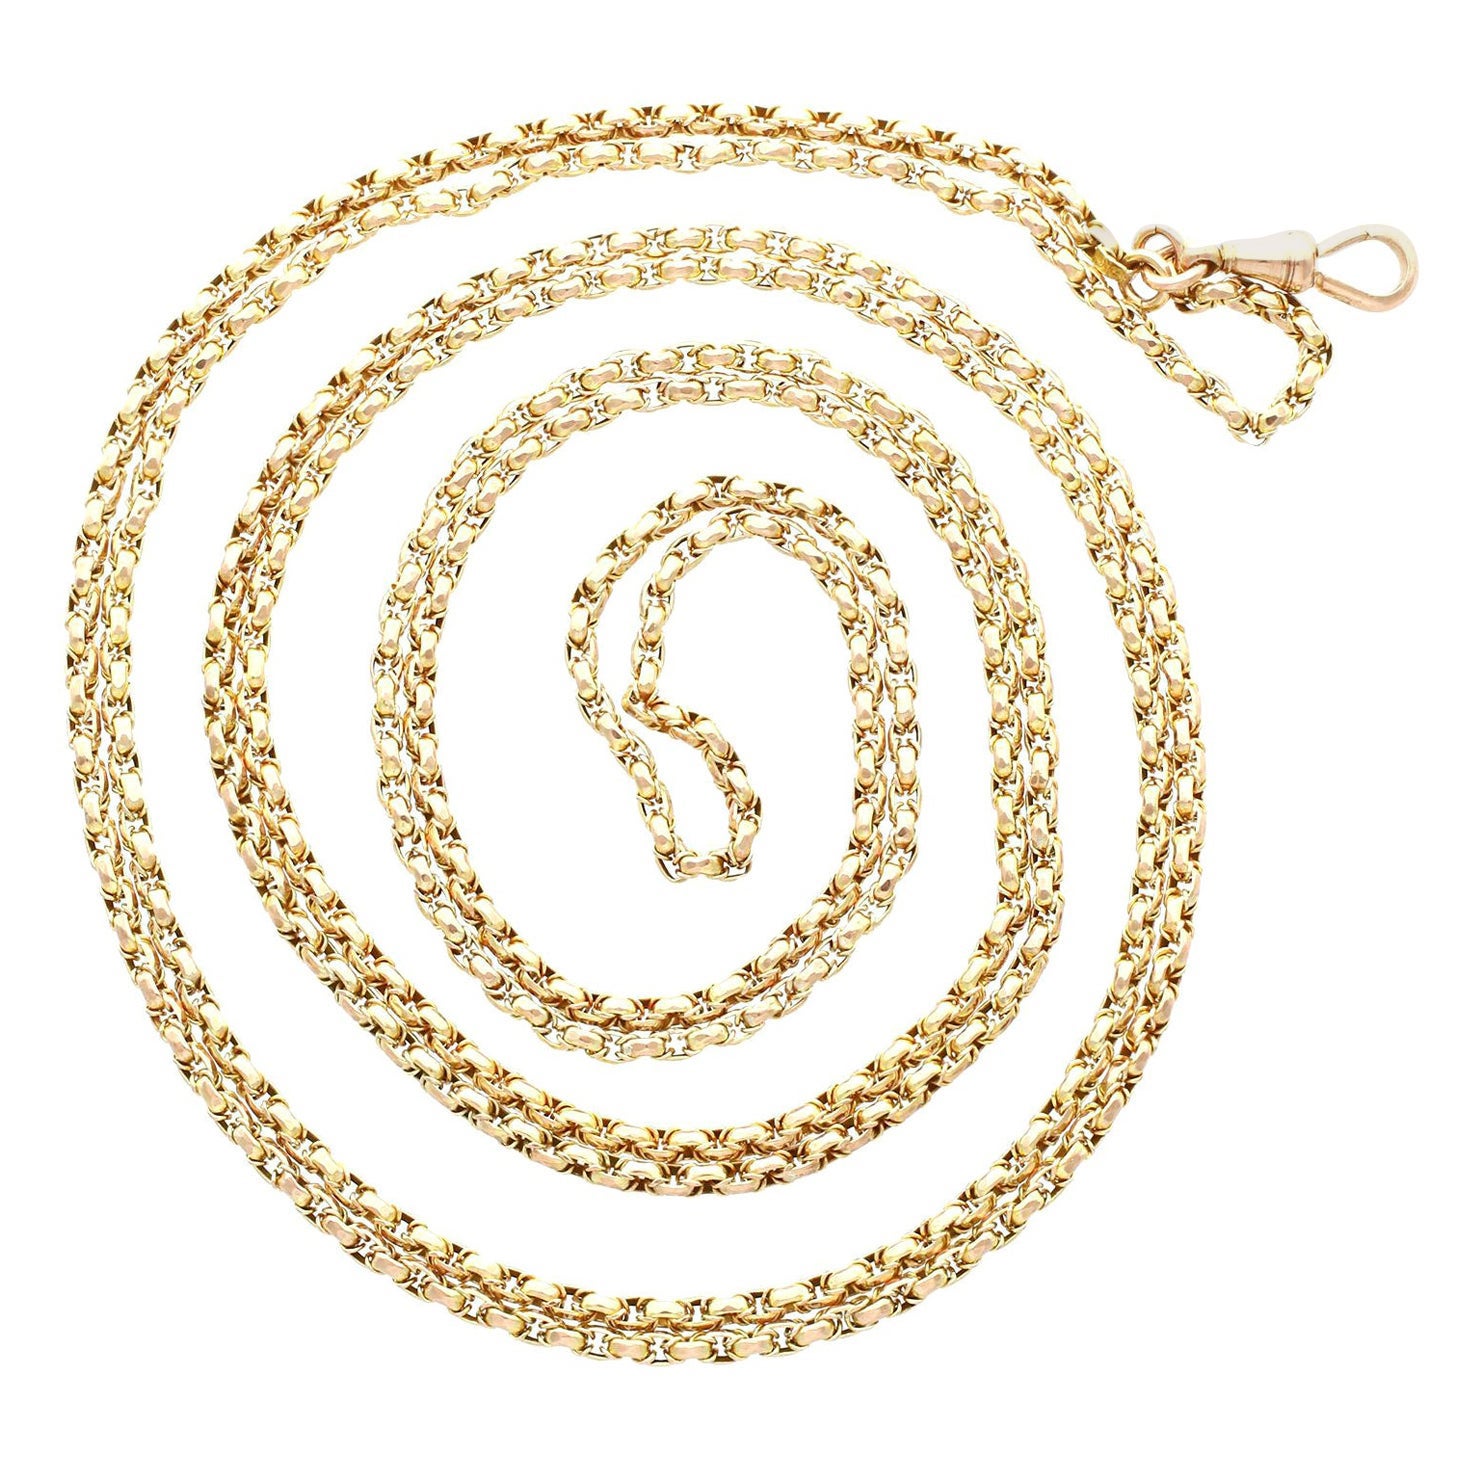 Antique 1890s 9k Yellow Gold Longuard Chain For Sale